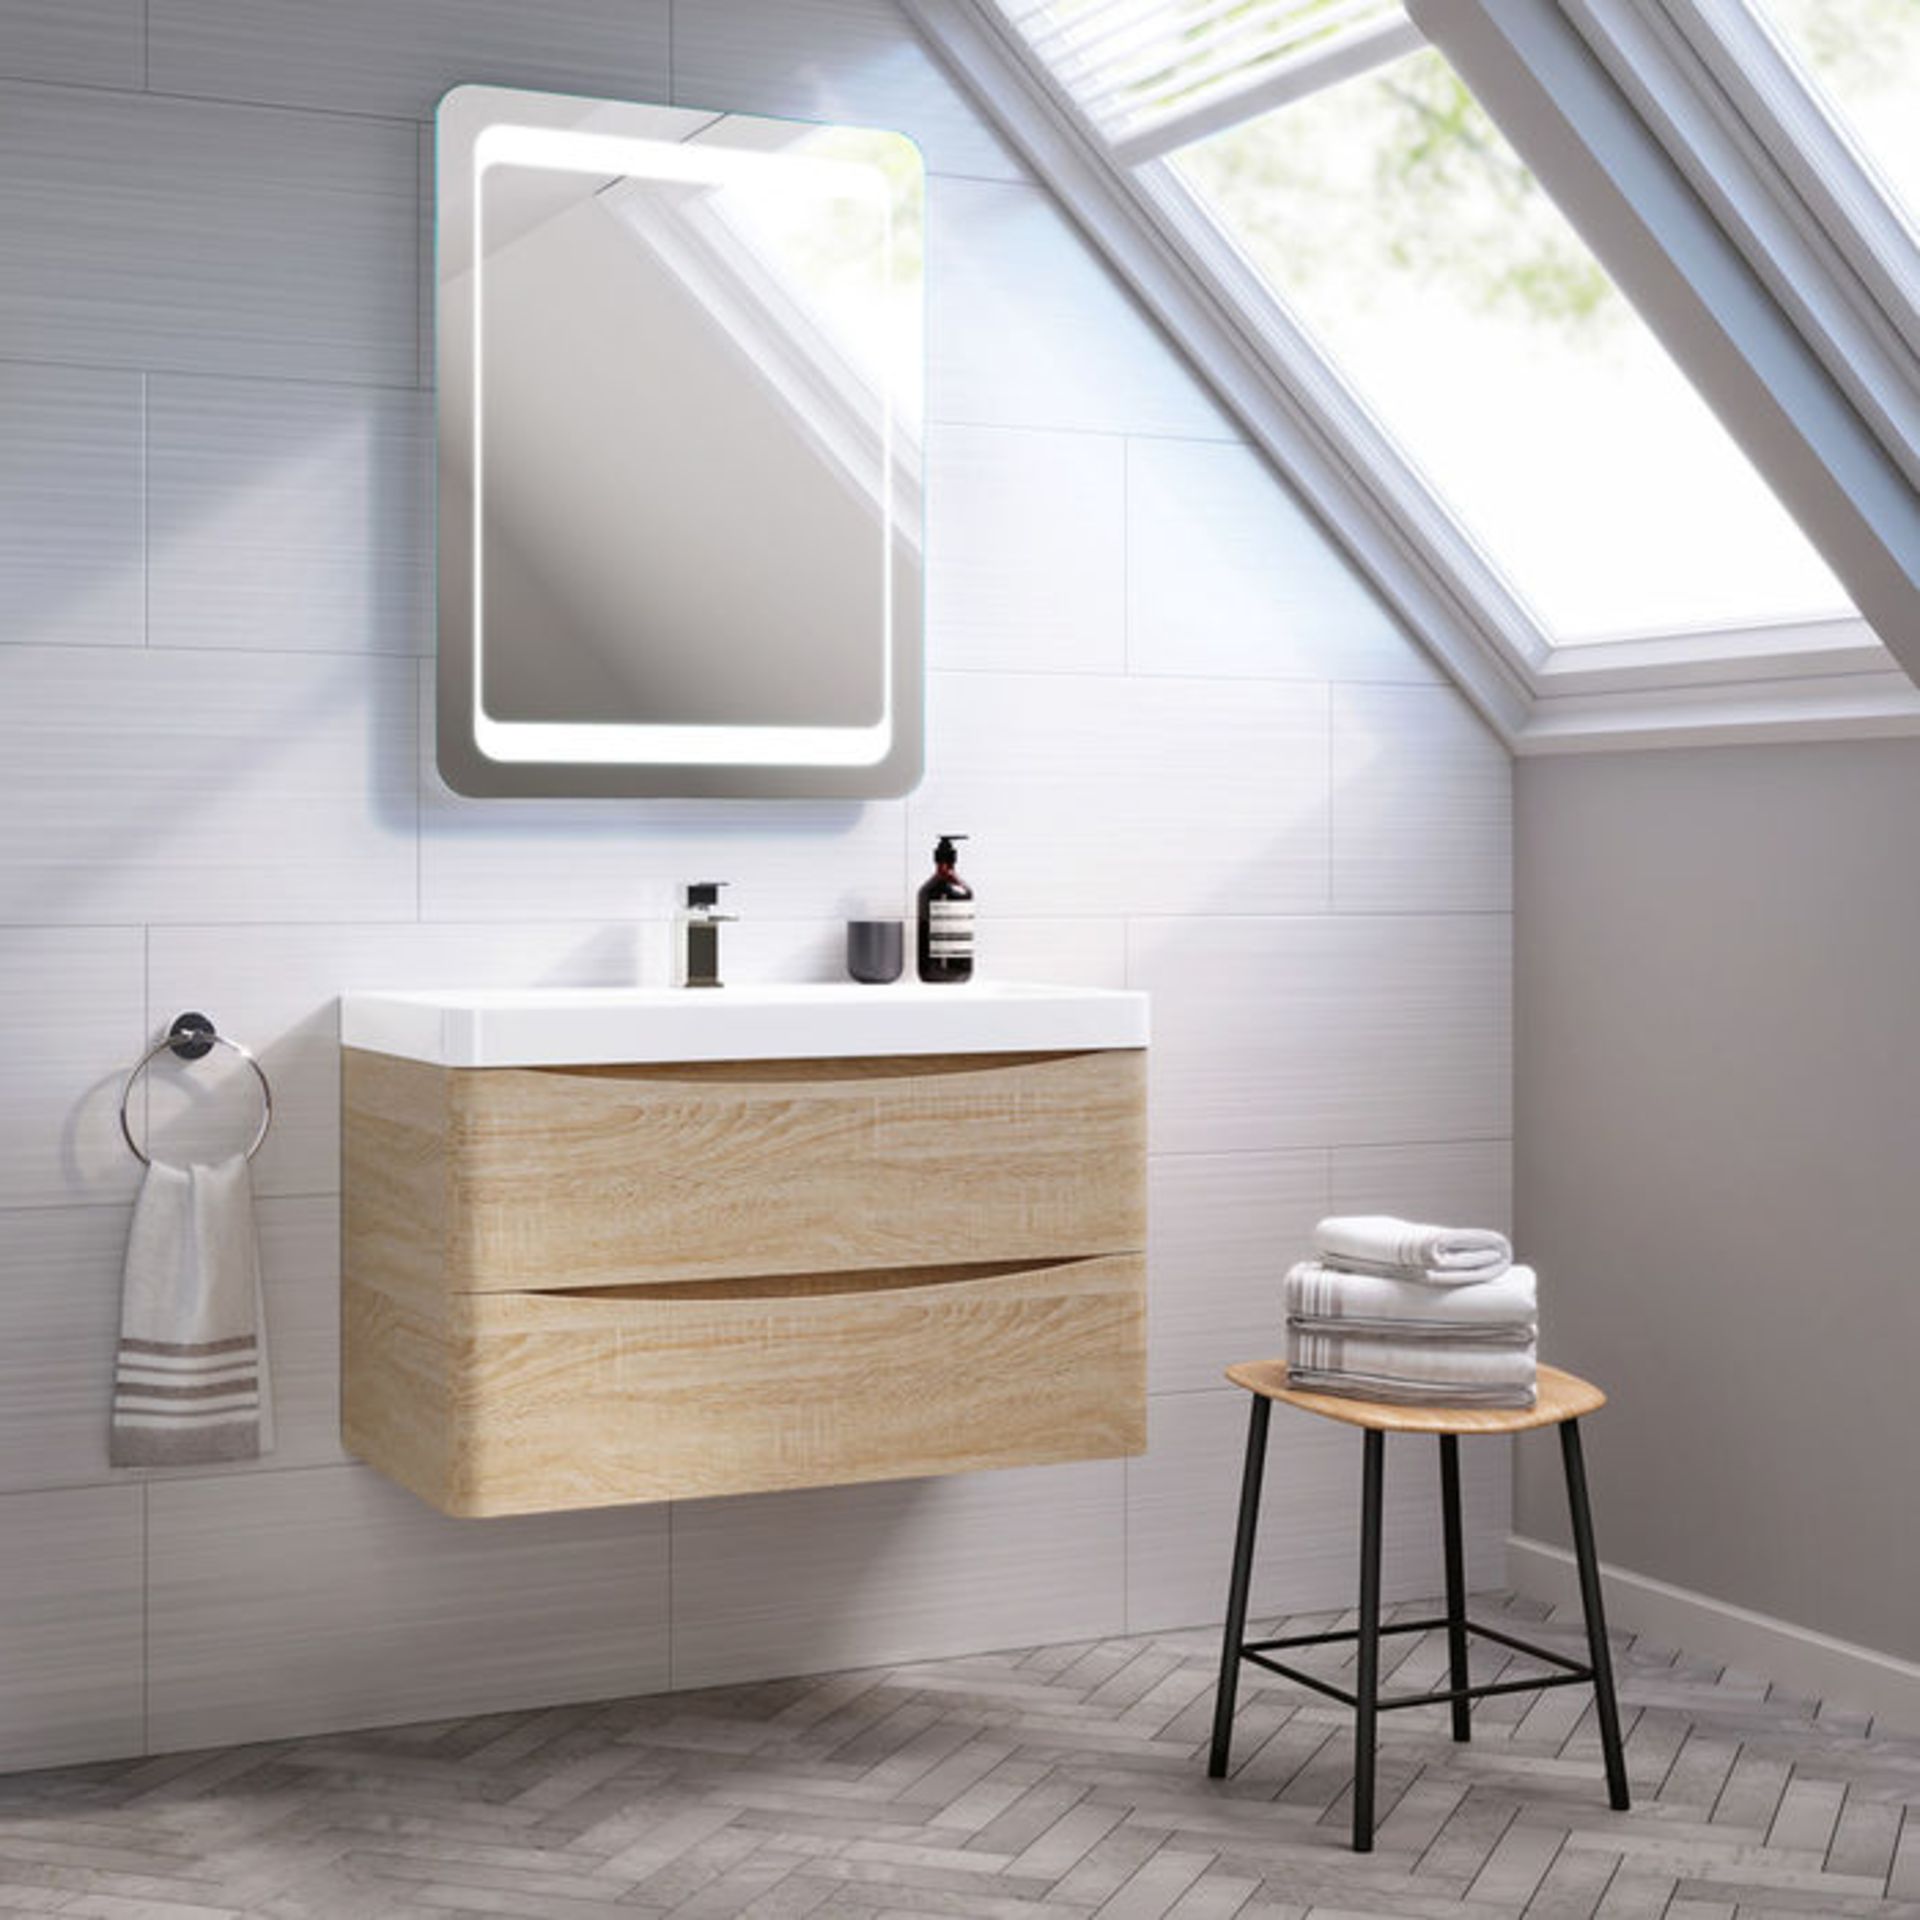 (DK22) 800x600mm Quasar Illuminated LED Mirror. RRP £349.99. Energy efficient LED lighting with IP44 - Image 6 of 7